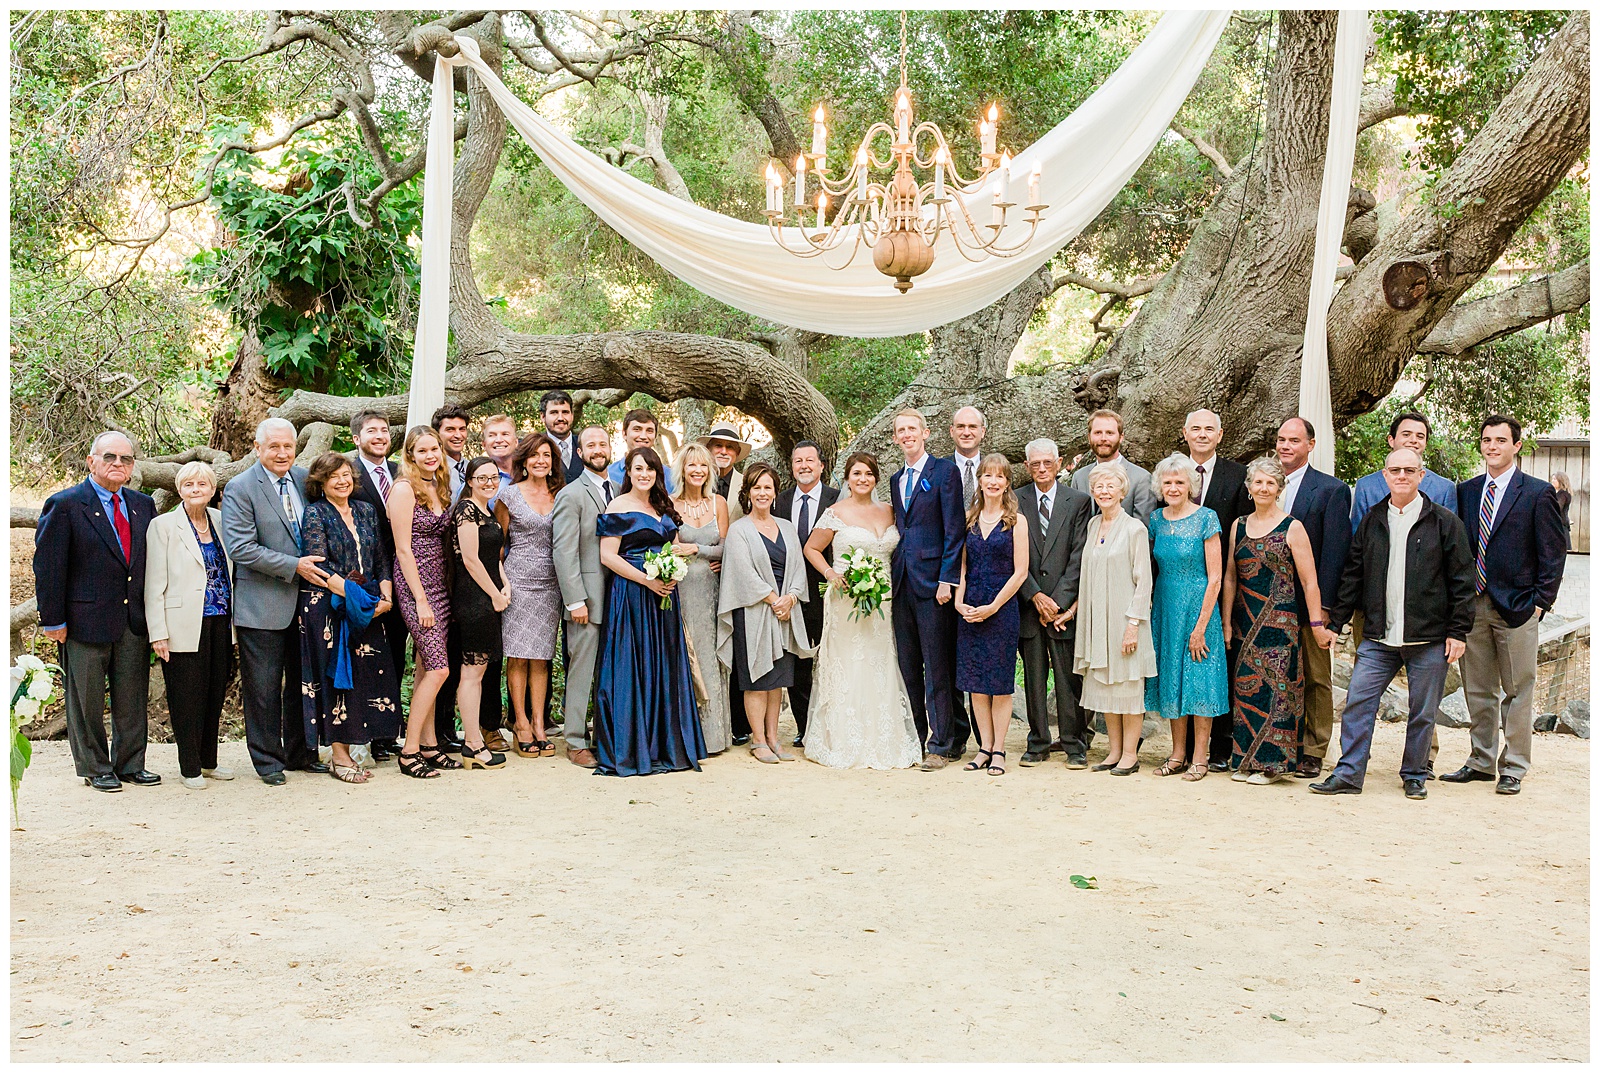 extended family photo after a wedding ceremony at la cuesta ranch in san luis obispo